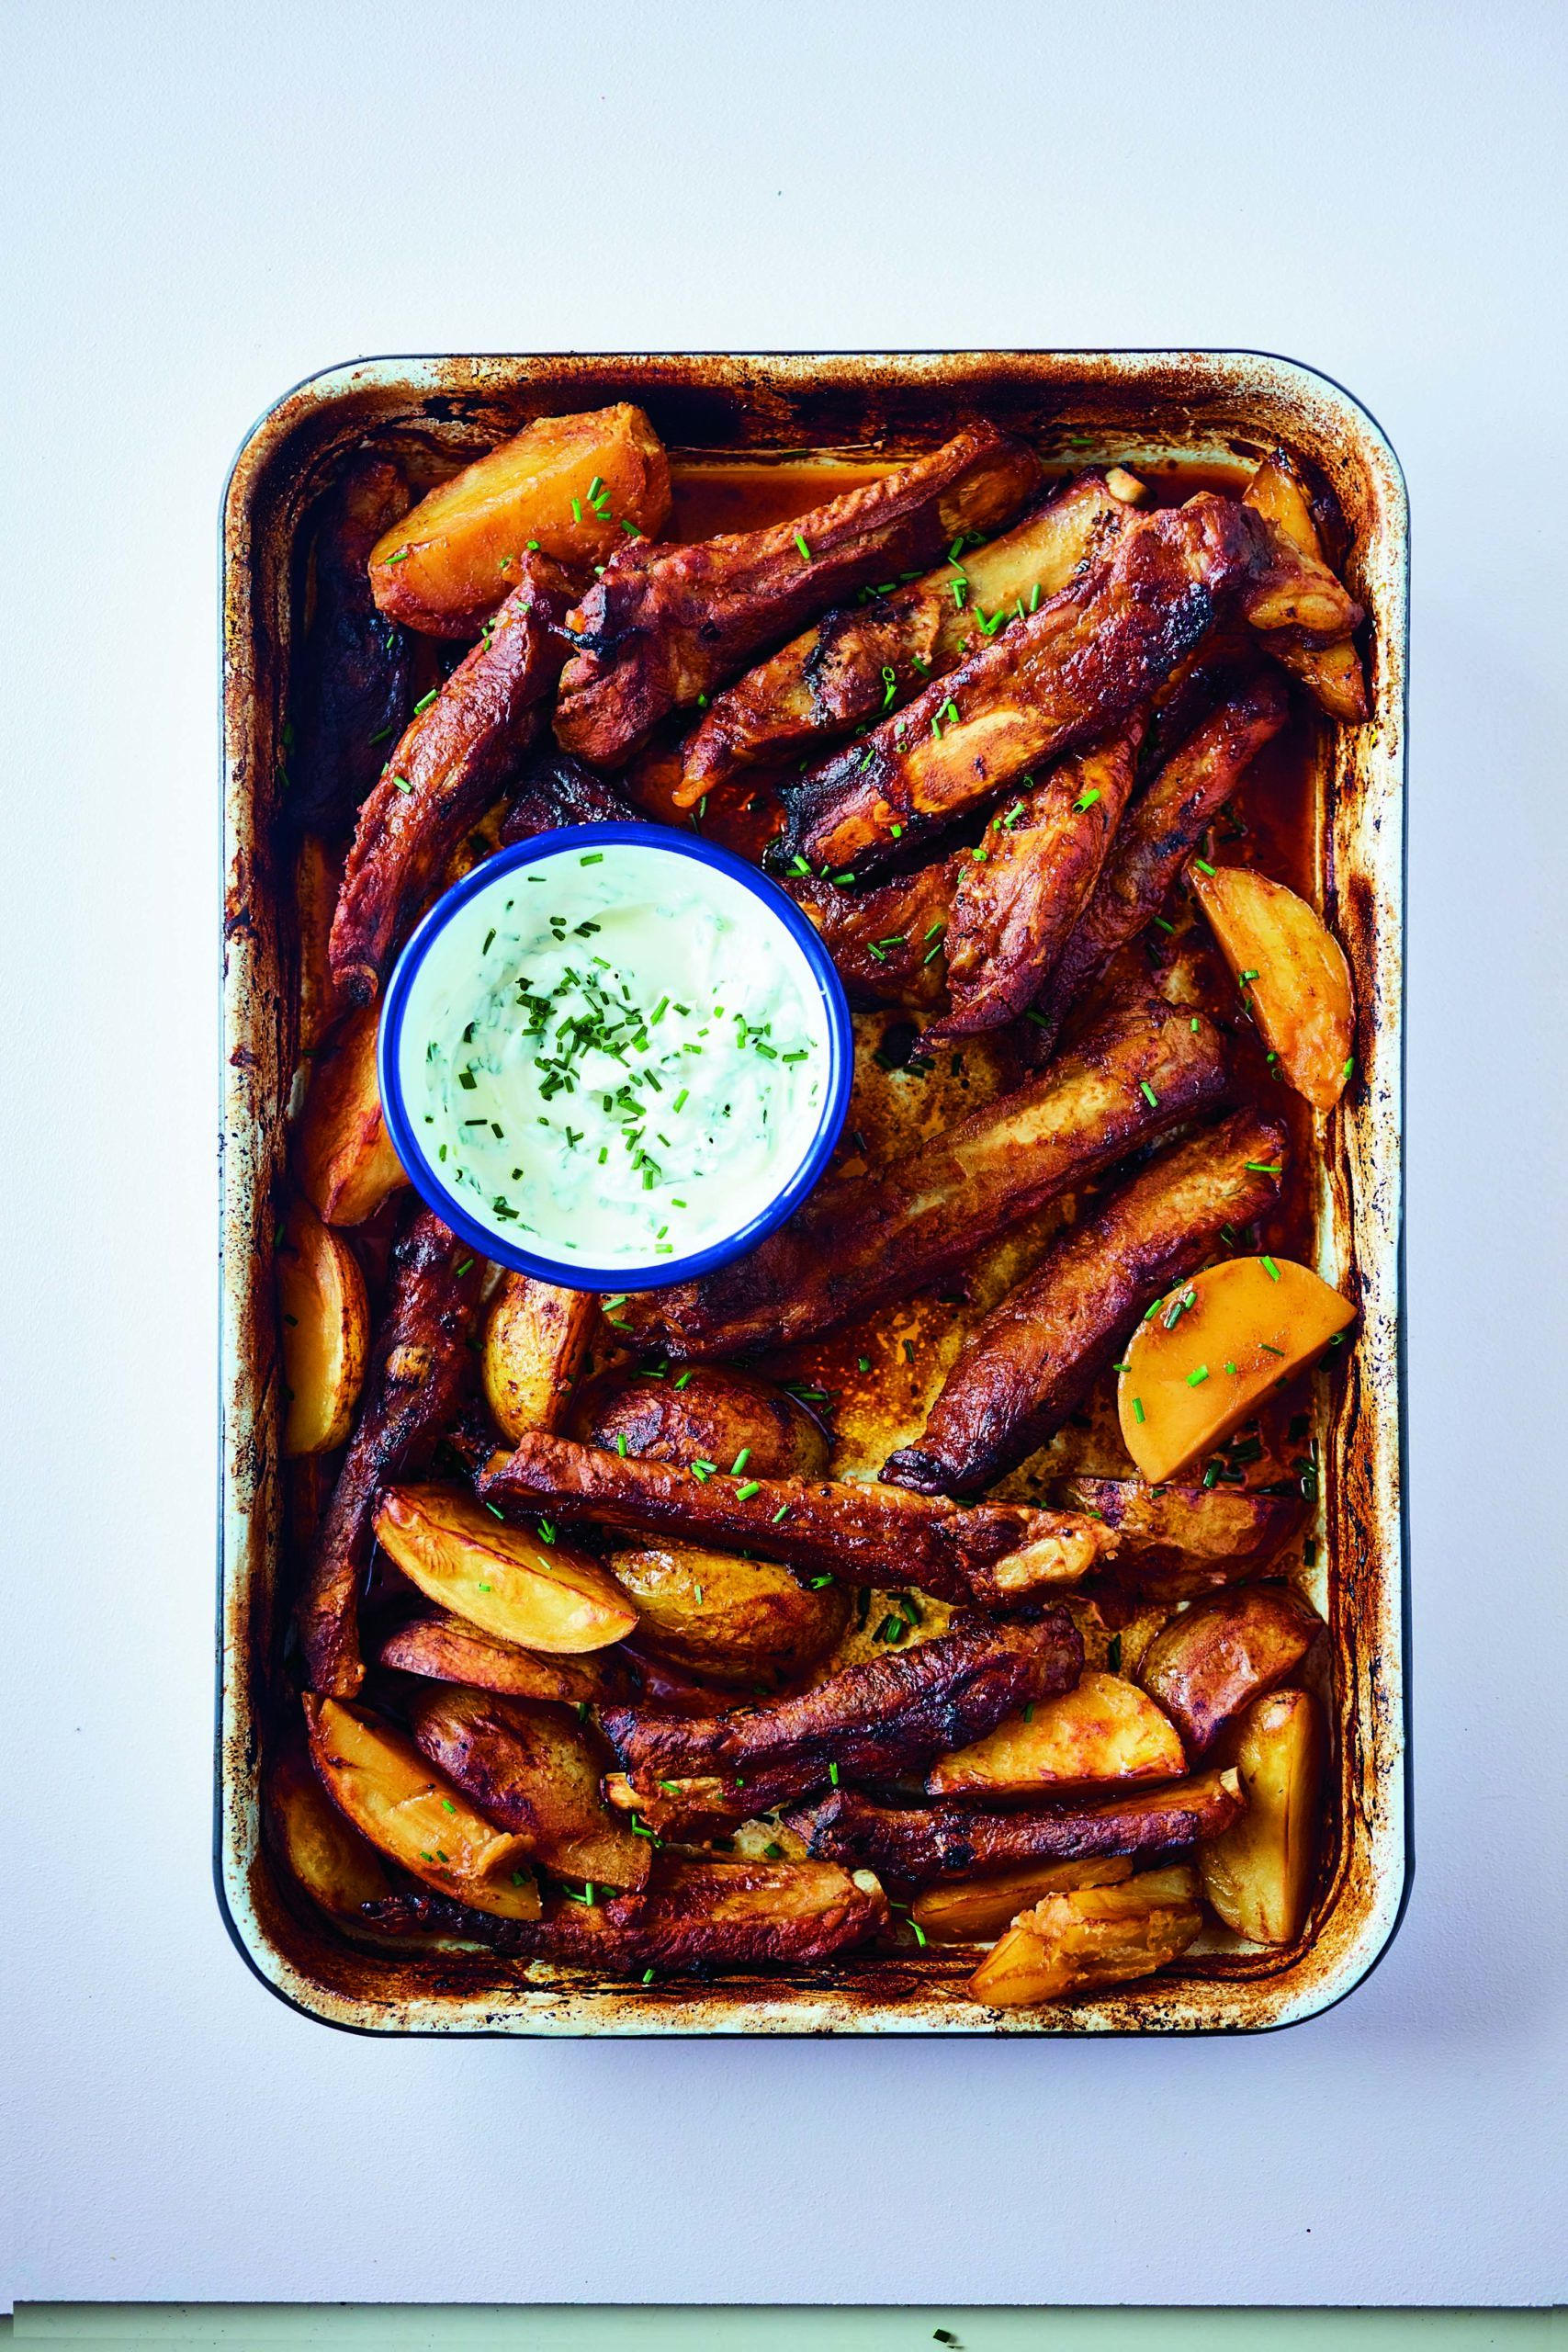 Rukmini Iyer’s Barbecue-Style Ribs with New Potatoes, Sour Cream and Chives